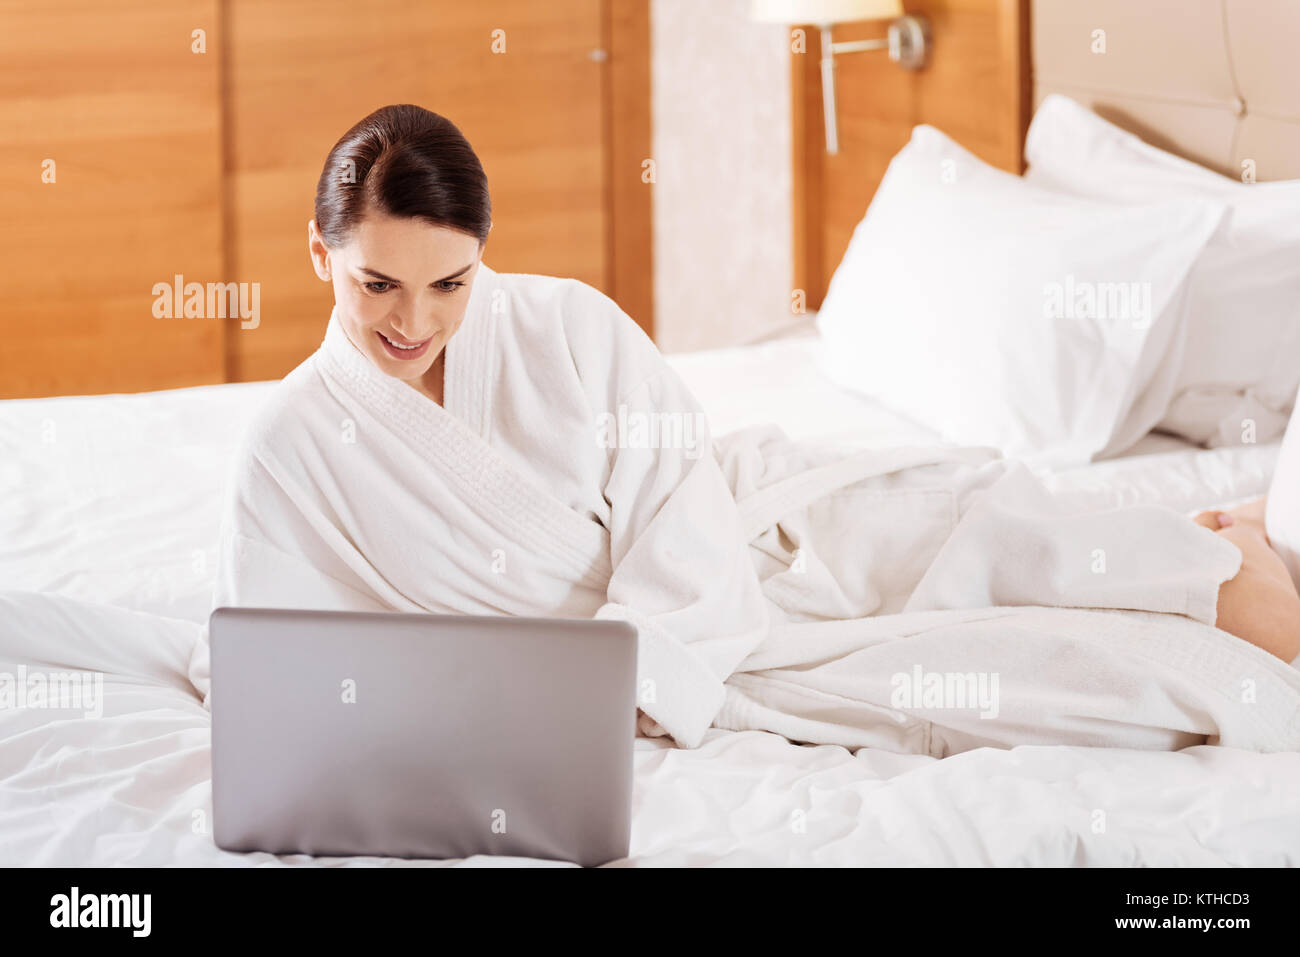 Brunette pleasant woman  checking mails Stock Photo